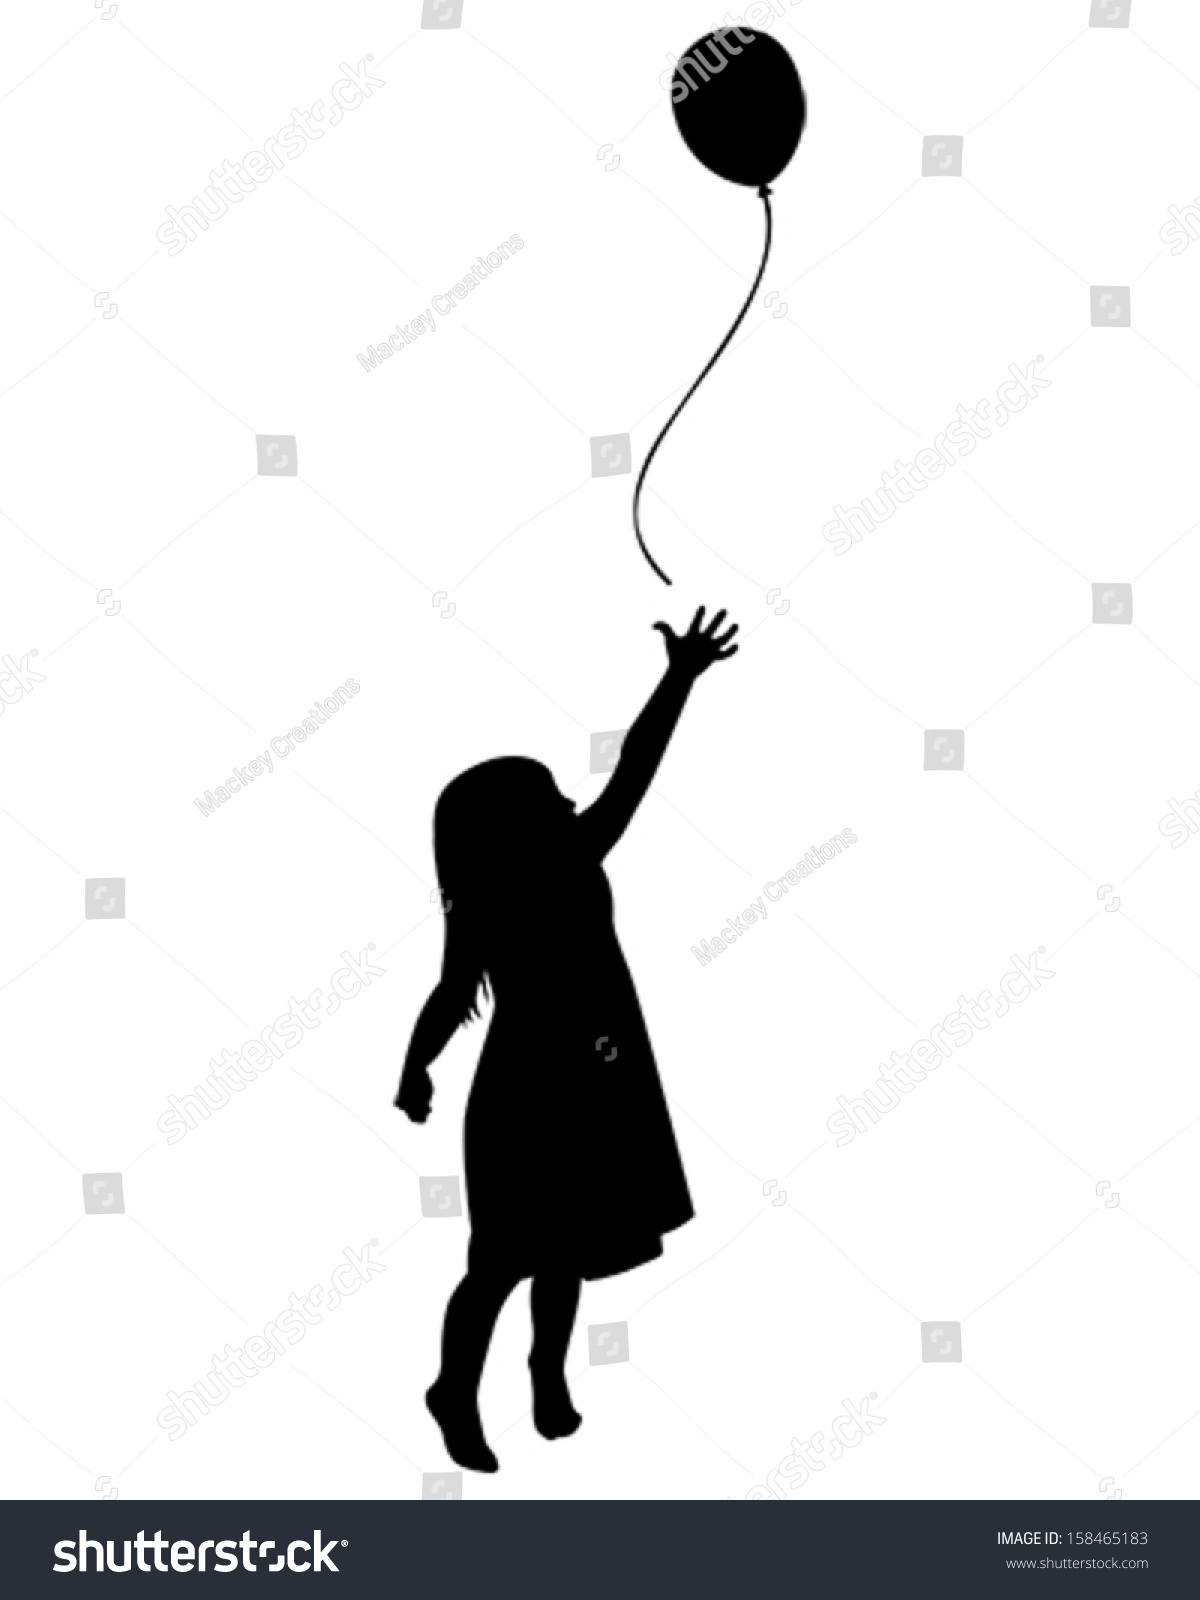 Vector Illustration Of A Little Girl Reaching For A Balloon - 158465183 ...